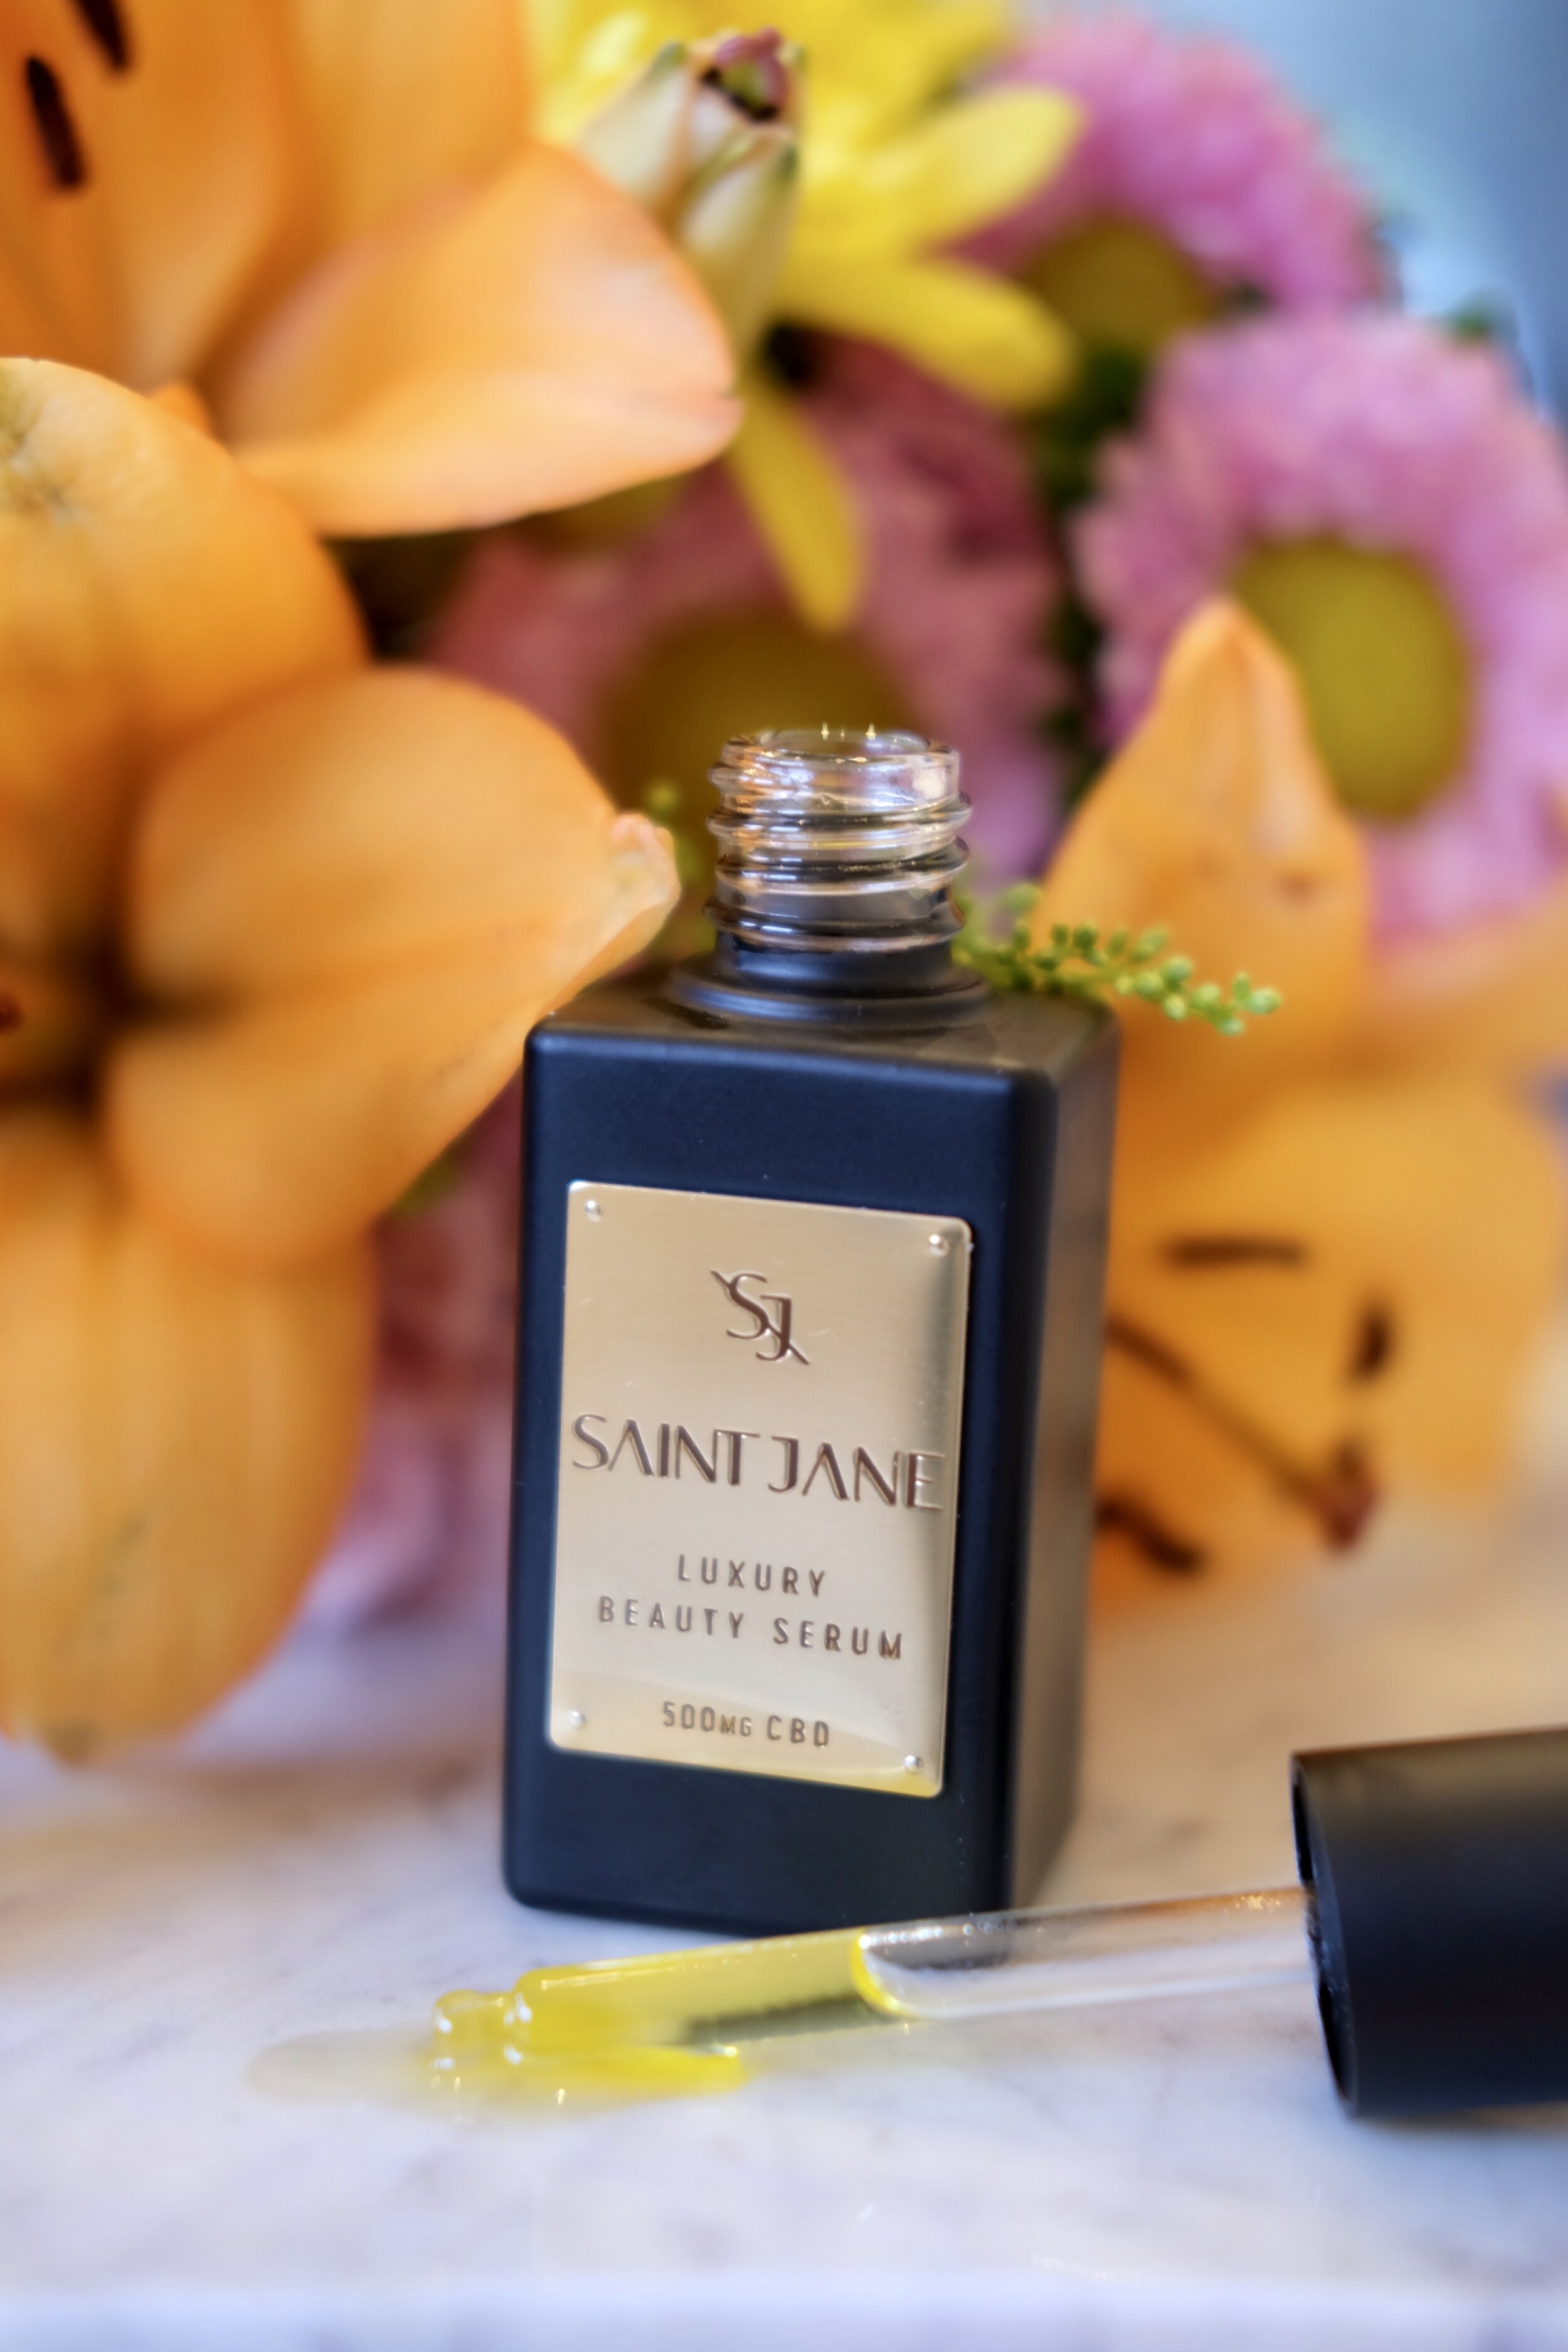 Saint Jane Beauty is a luxury CBD beauty brand which I delve into in this Saint Jane Review. Saint Jane Beauty infuses every formula with carefully-curated, sustainably sourced botanicals and high concentrations of CBD. Saint Jane’s hero product is S